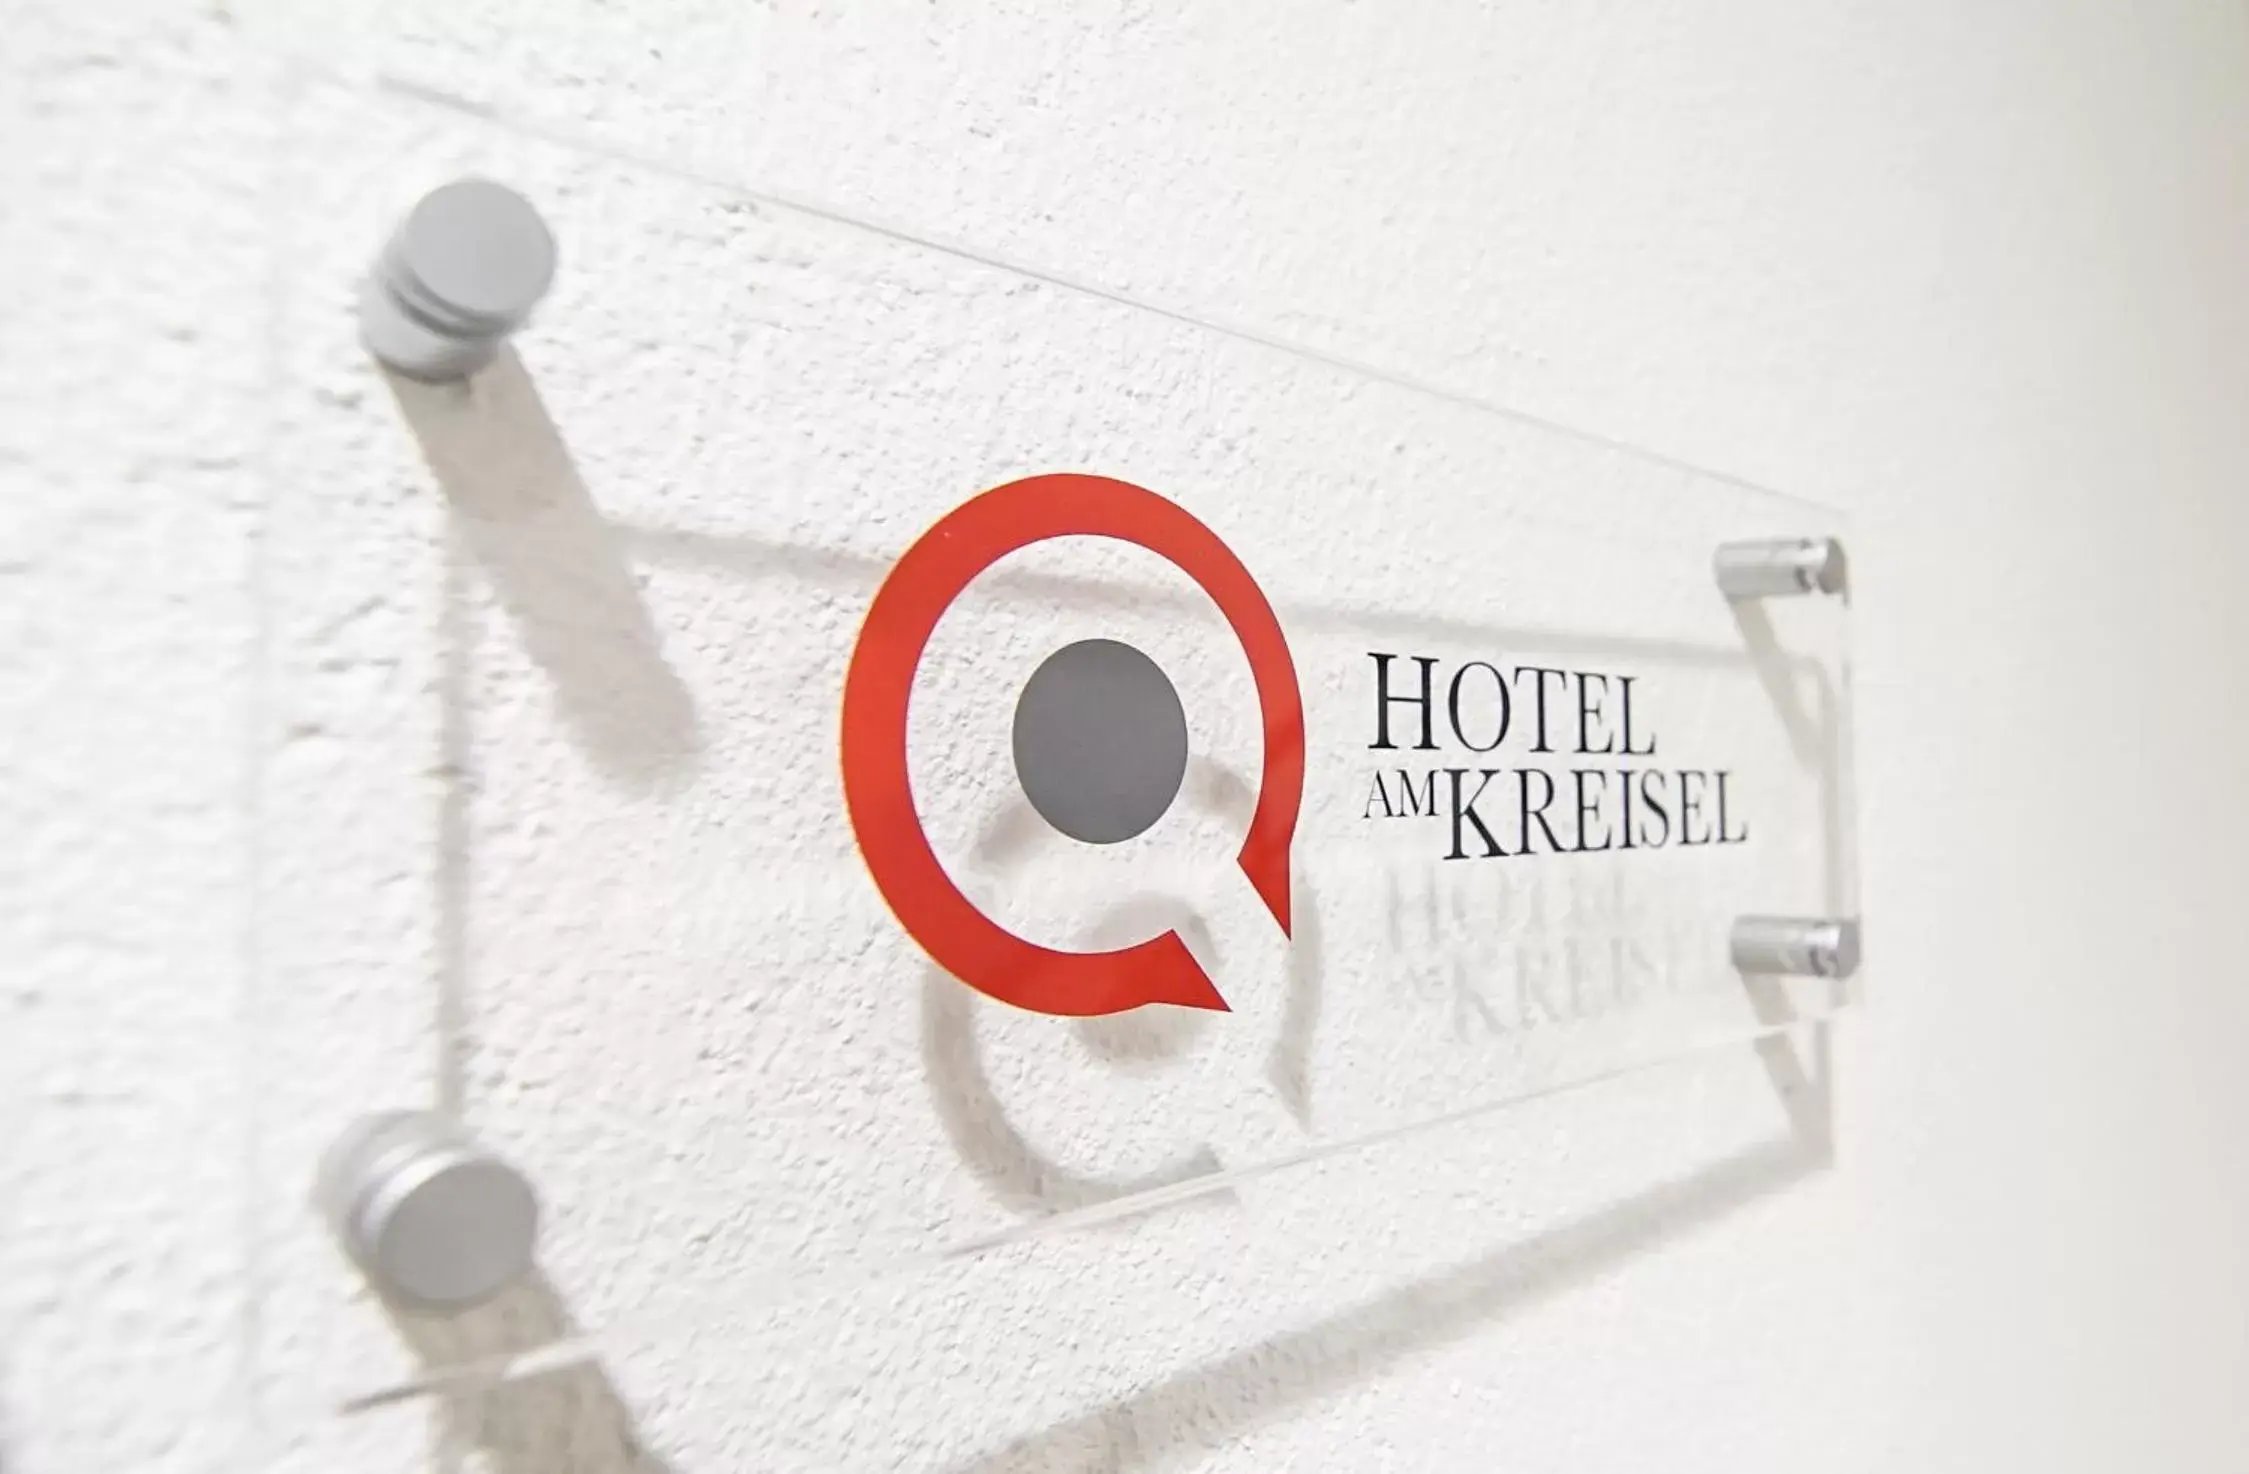 Property logo or sign in Hotel am Kreisel: Self-Service Check-In Hotel